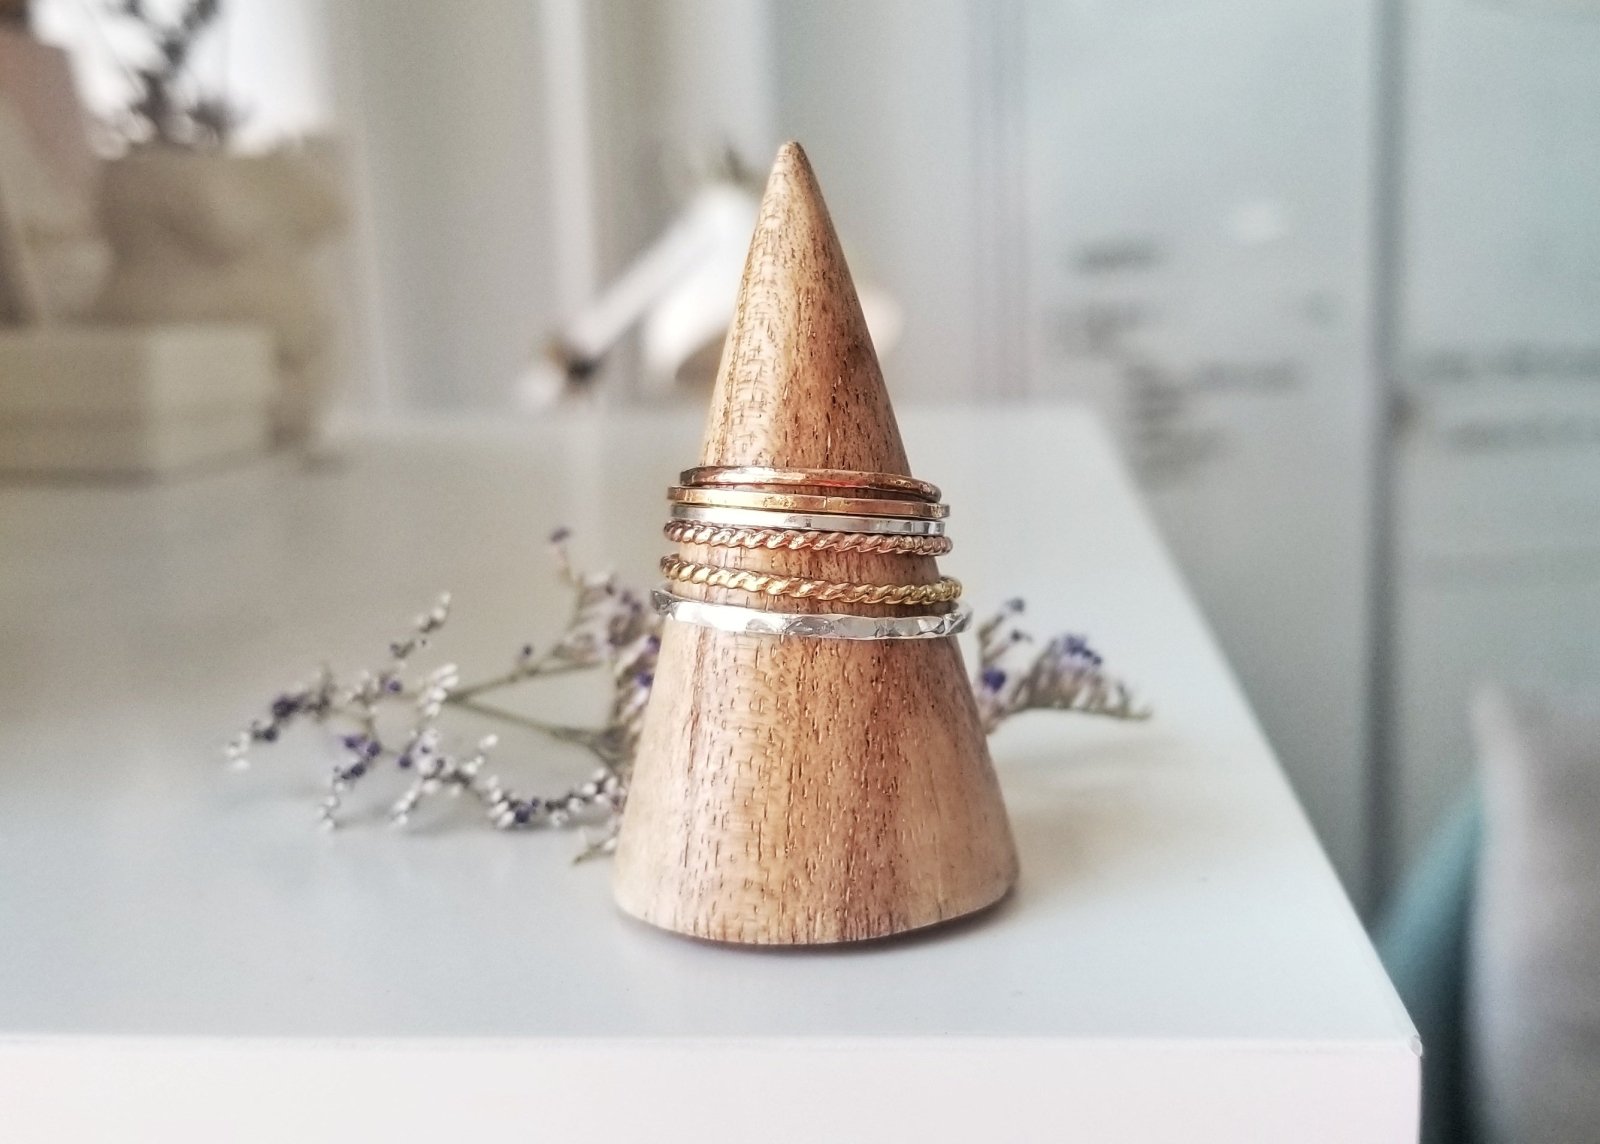 Stacking Ring Workshop - Visit the LanaBetty Studio in Gastown, Vancouver